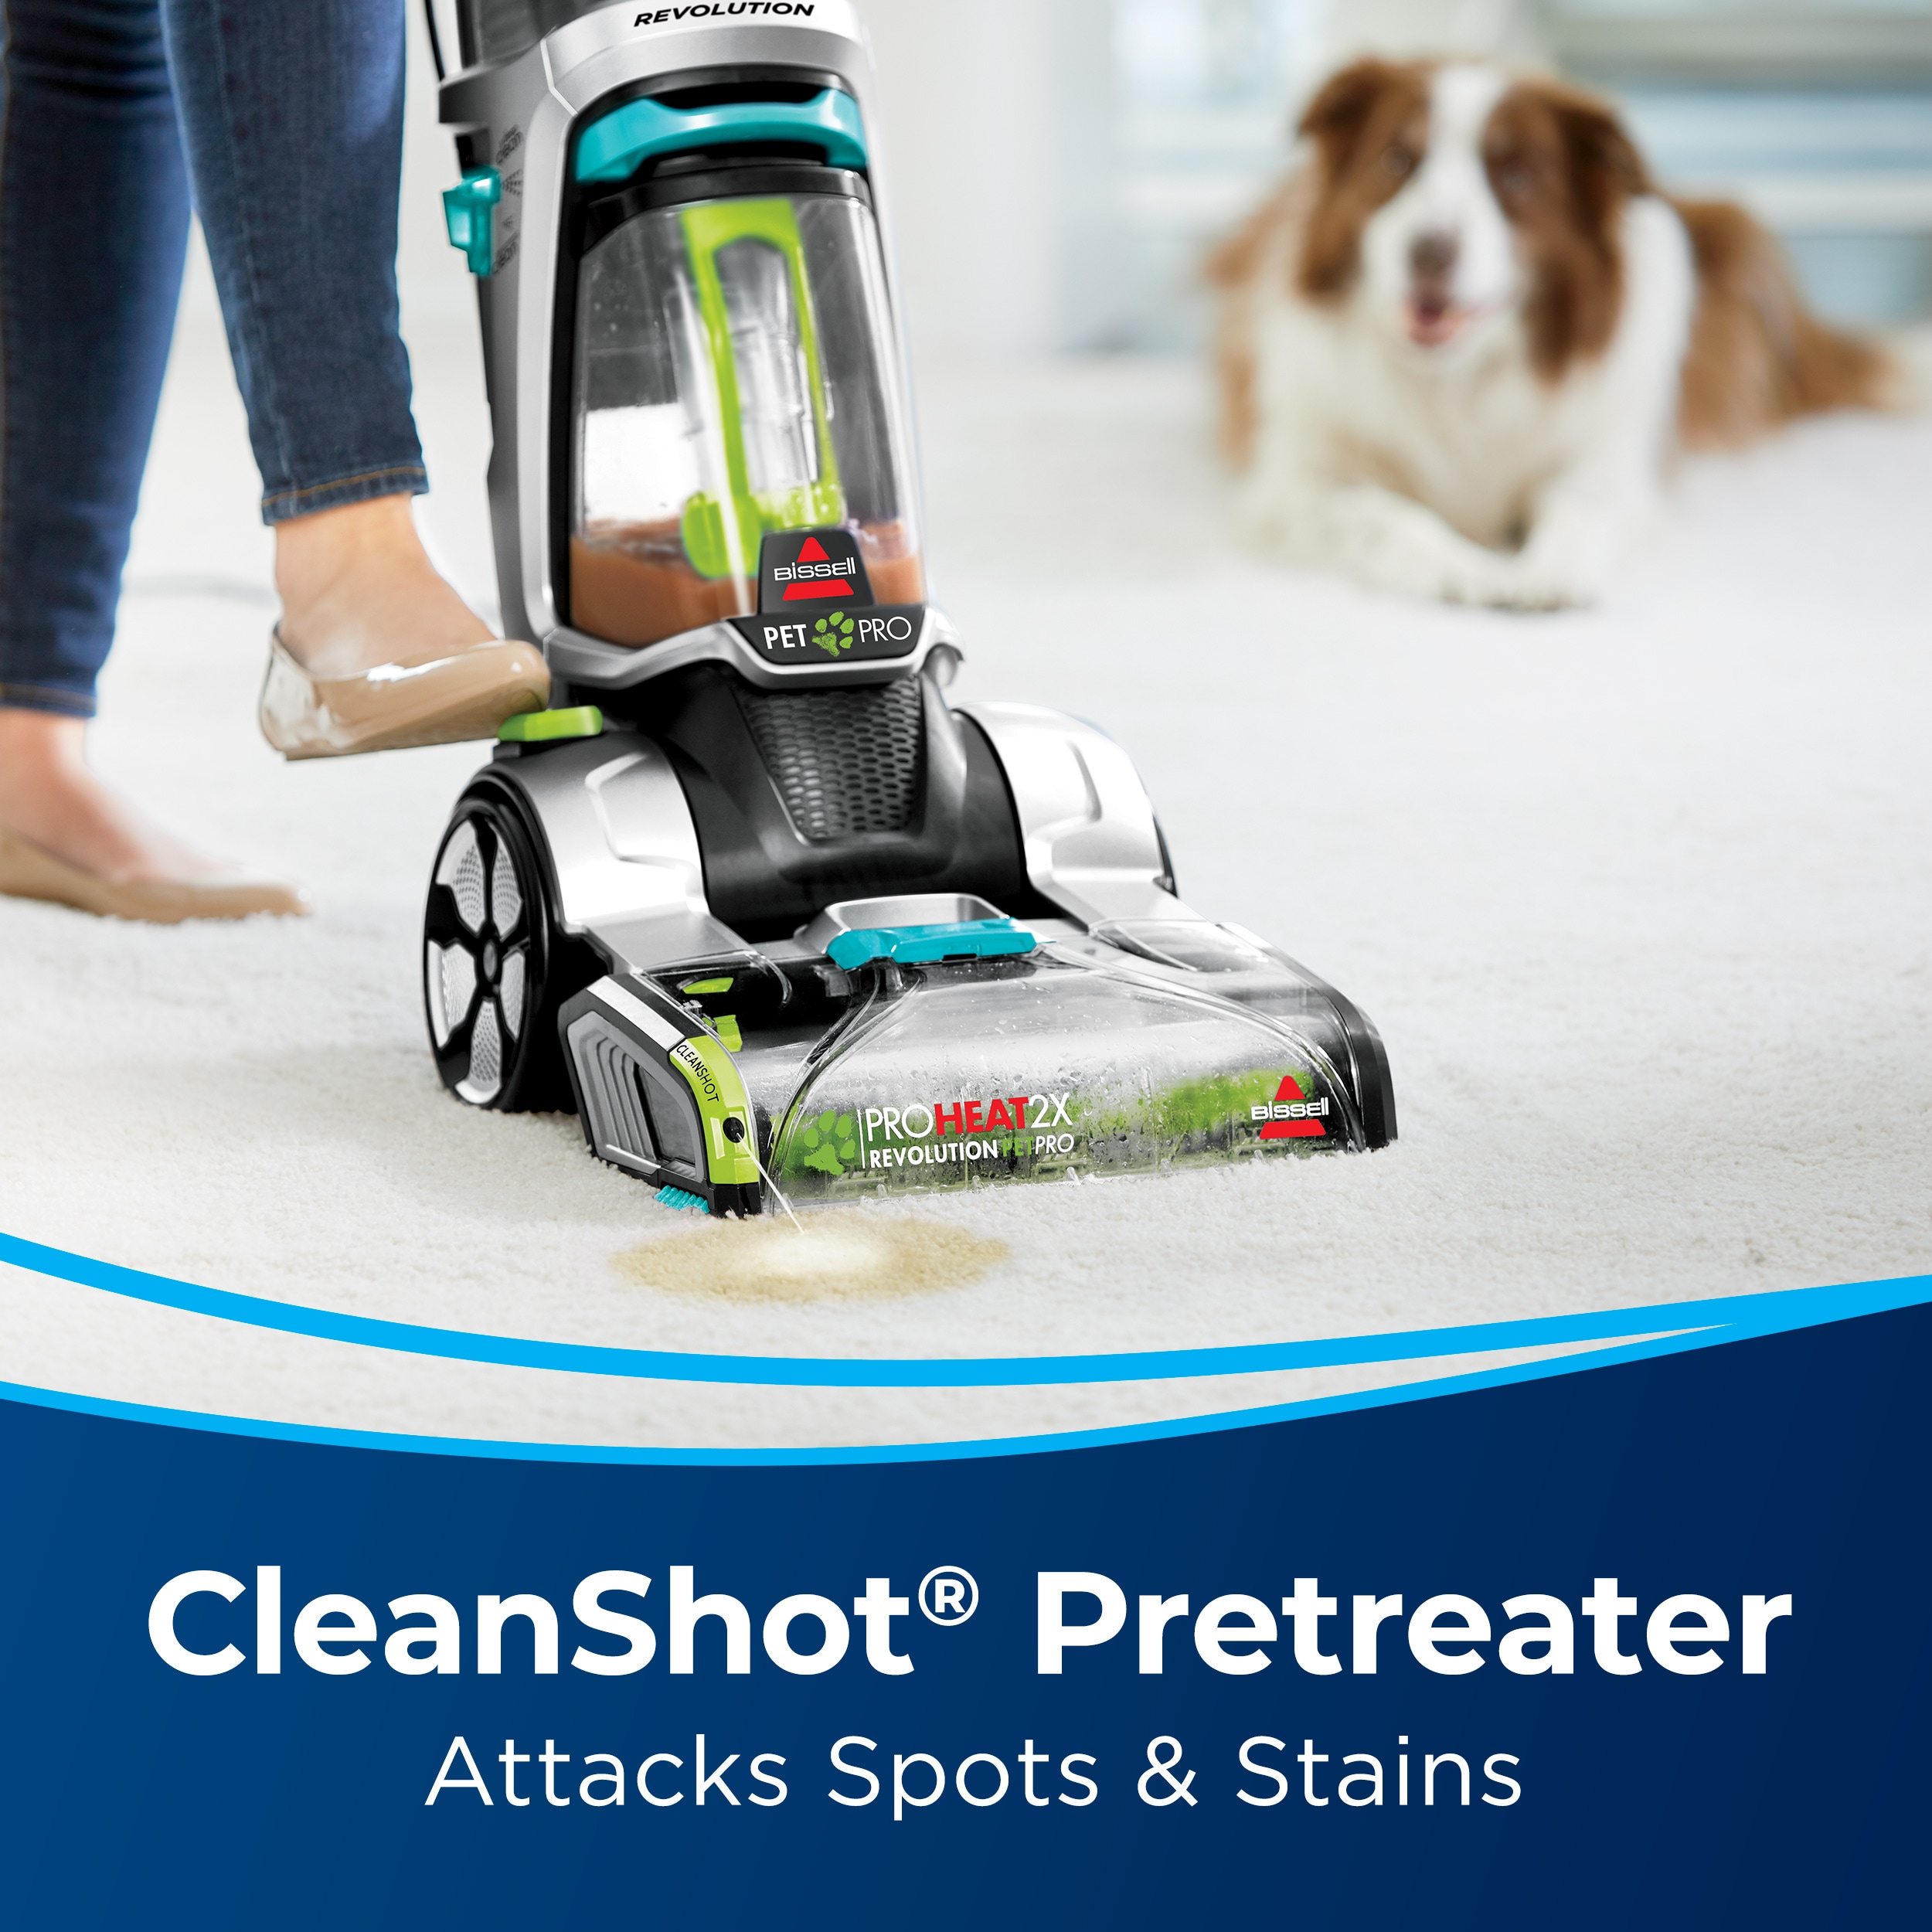 BISSELL ProHeat 2X Revolution Pet Pro Plus Carpet Cleaner in the